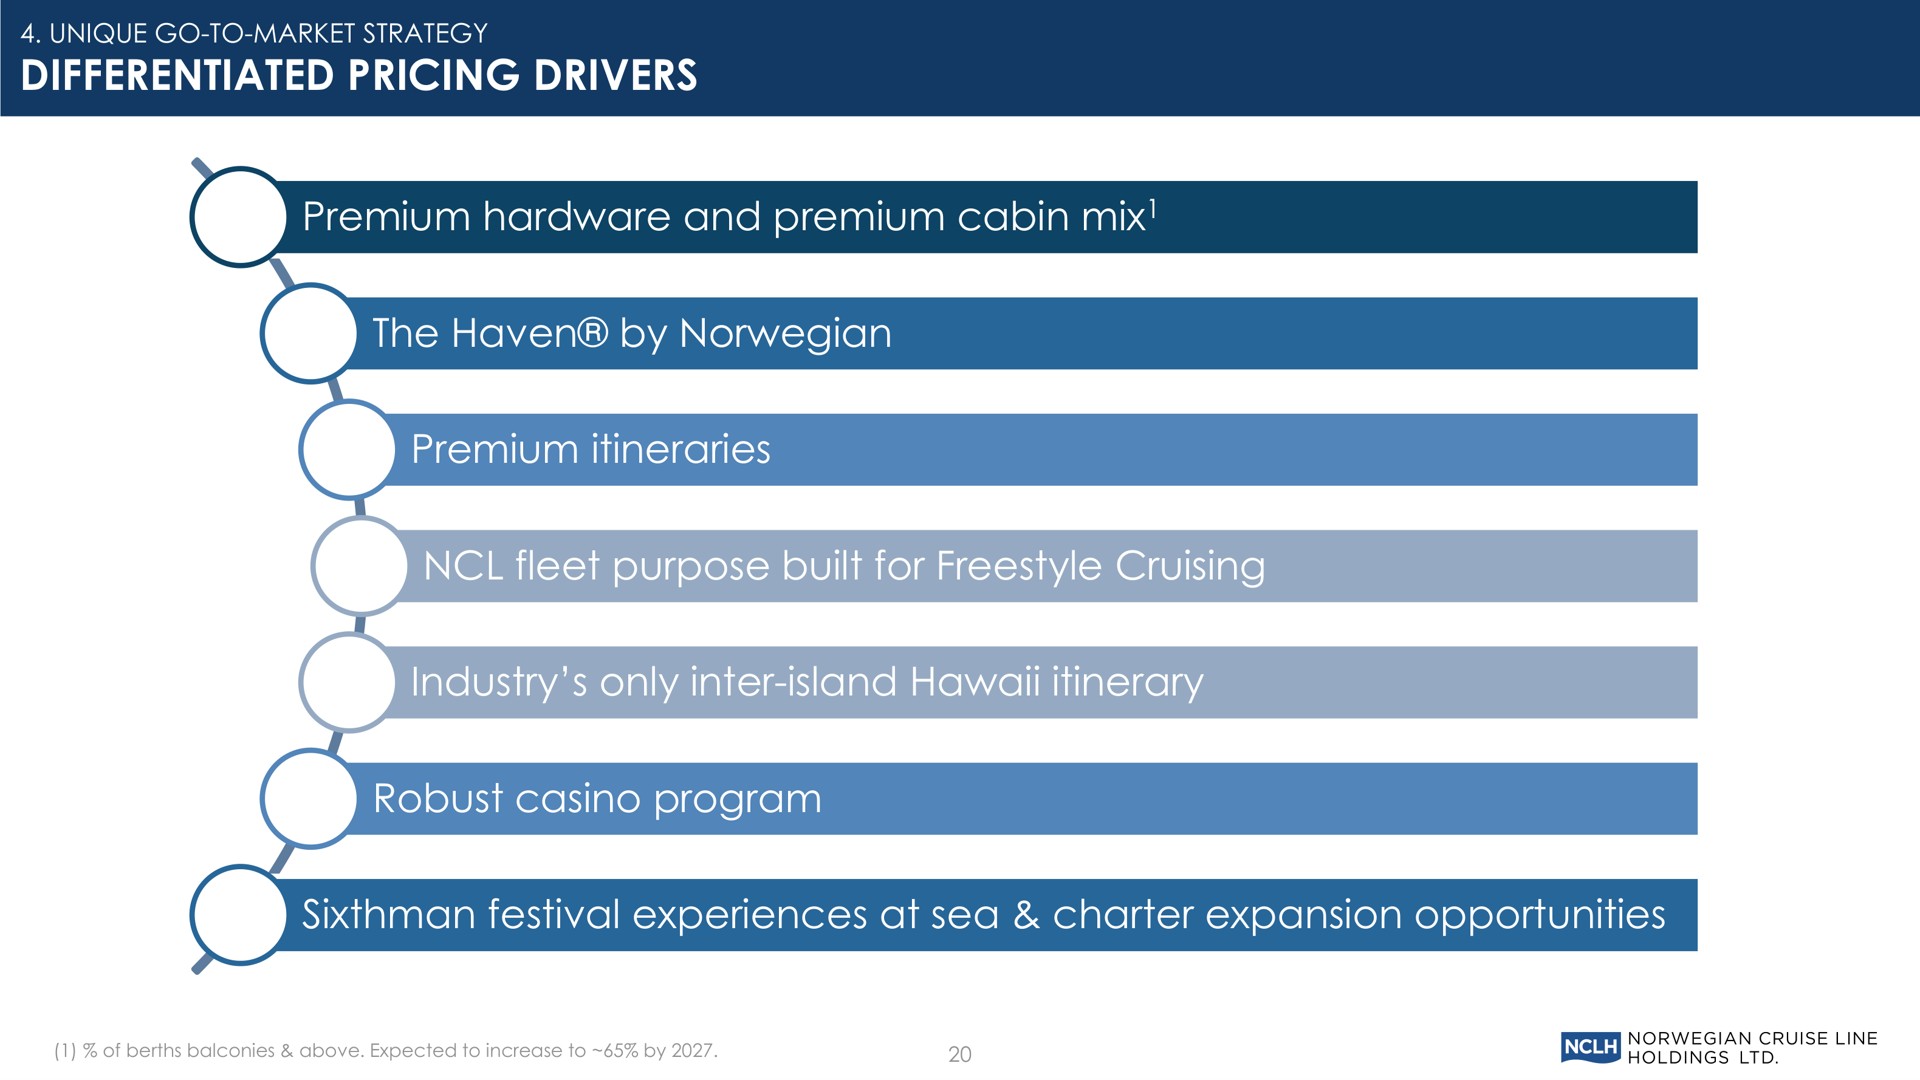 differentiated pricing drivers premium hardware and premium cabin mix the haven by premium itineraries fleet purpose built for cruising industry only inter island itinerary robust casino program festival experiences at sea charter expansion opportunities unique go to market strategy | Norwegian Cruise Line